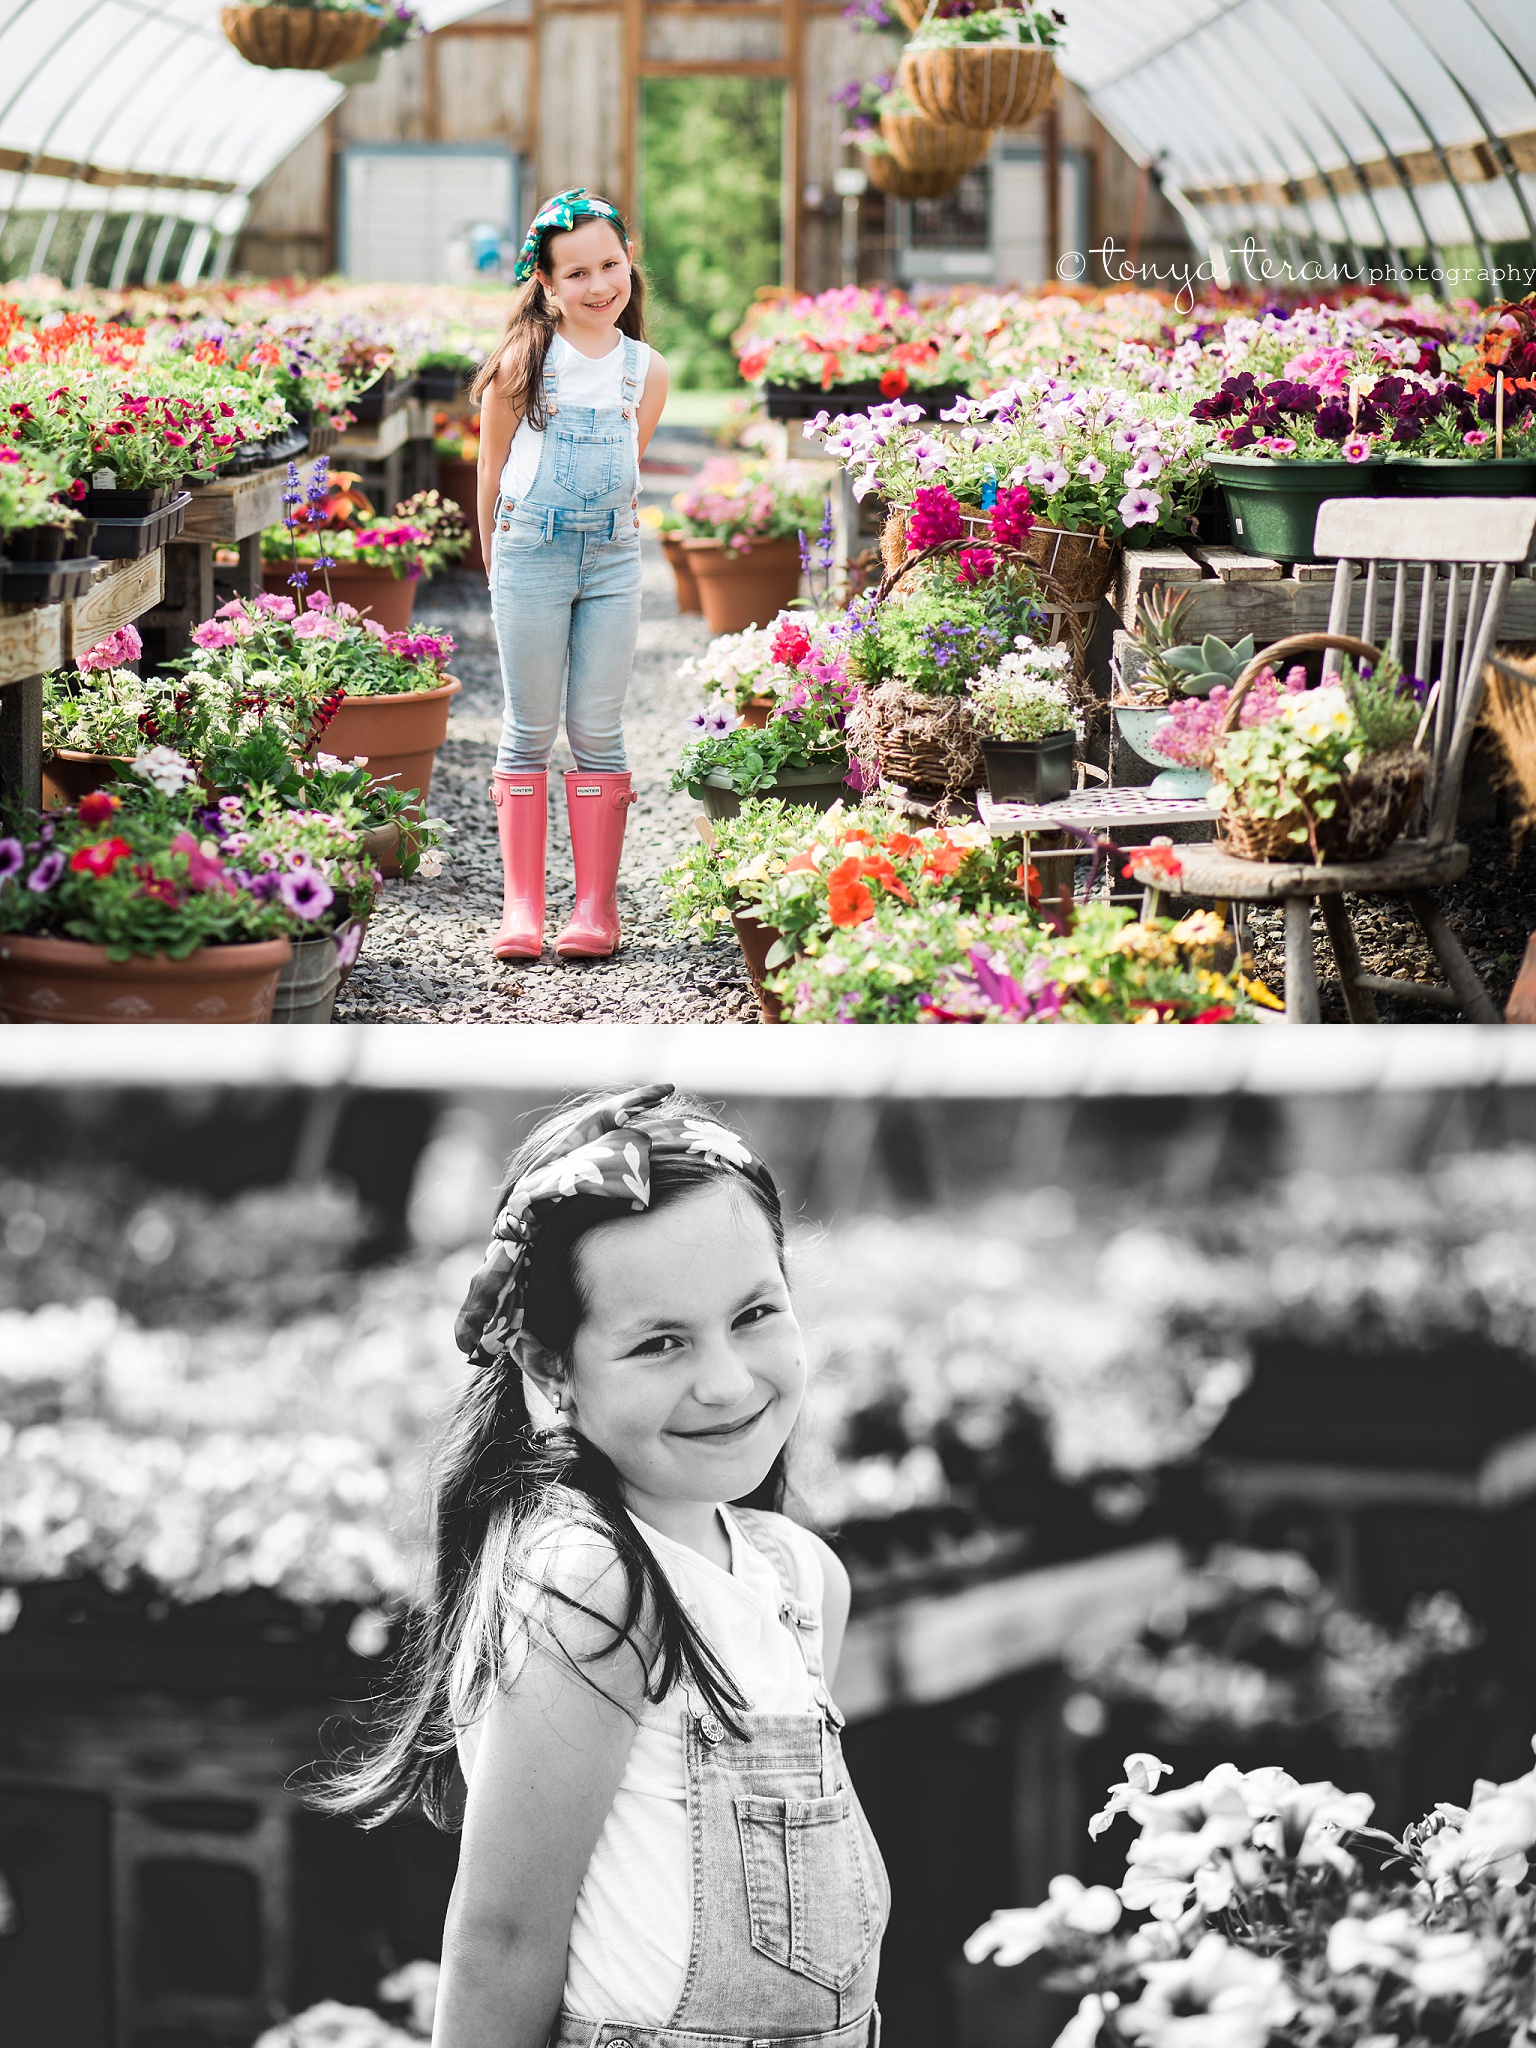 Spring Flowers Greenhouse Session | Tonya Teran Photography, Frederick, MD Newborn, Baby and Family Photographer